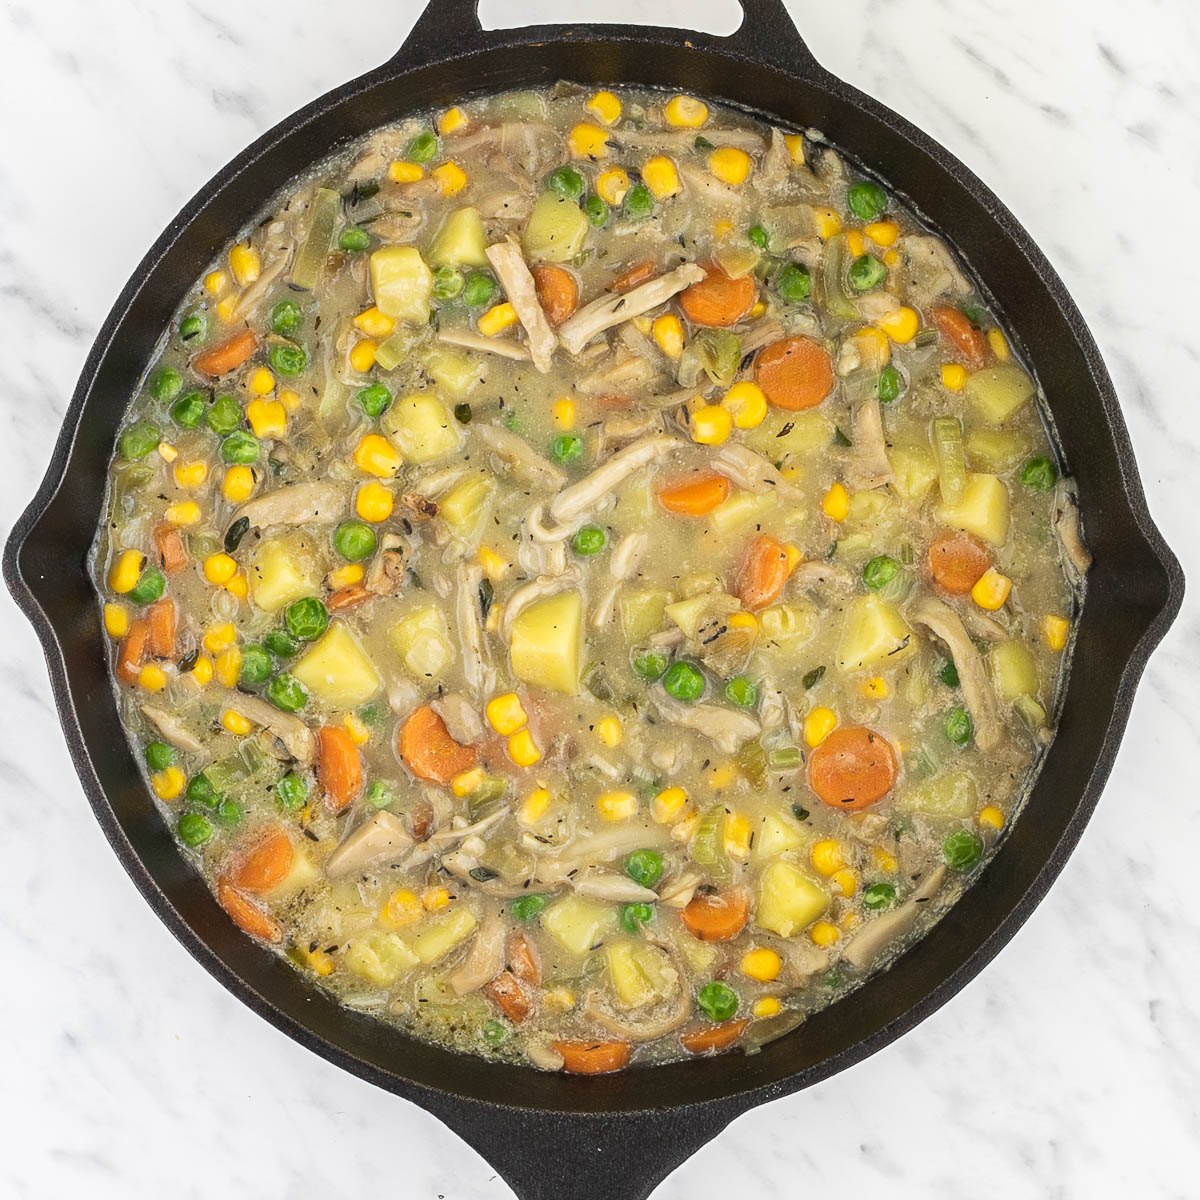 Cast iron skillet with light brown thick stew full of sliced carrots, chopped onion, garlic, celery, potatoes, corn, peas, shredded king oyster mushrooms, bay leaves, thyme.